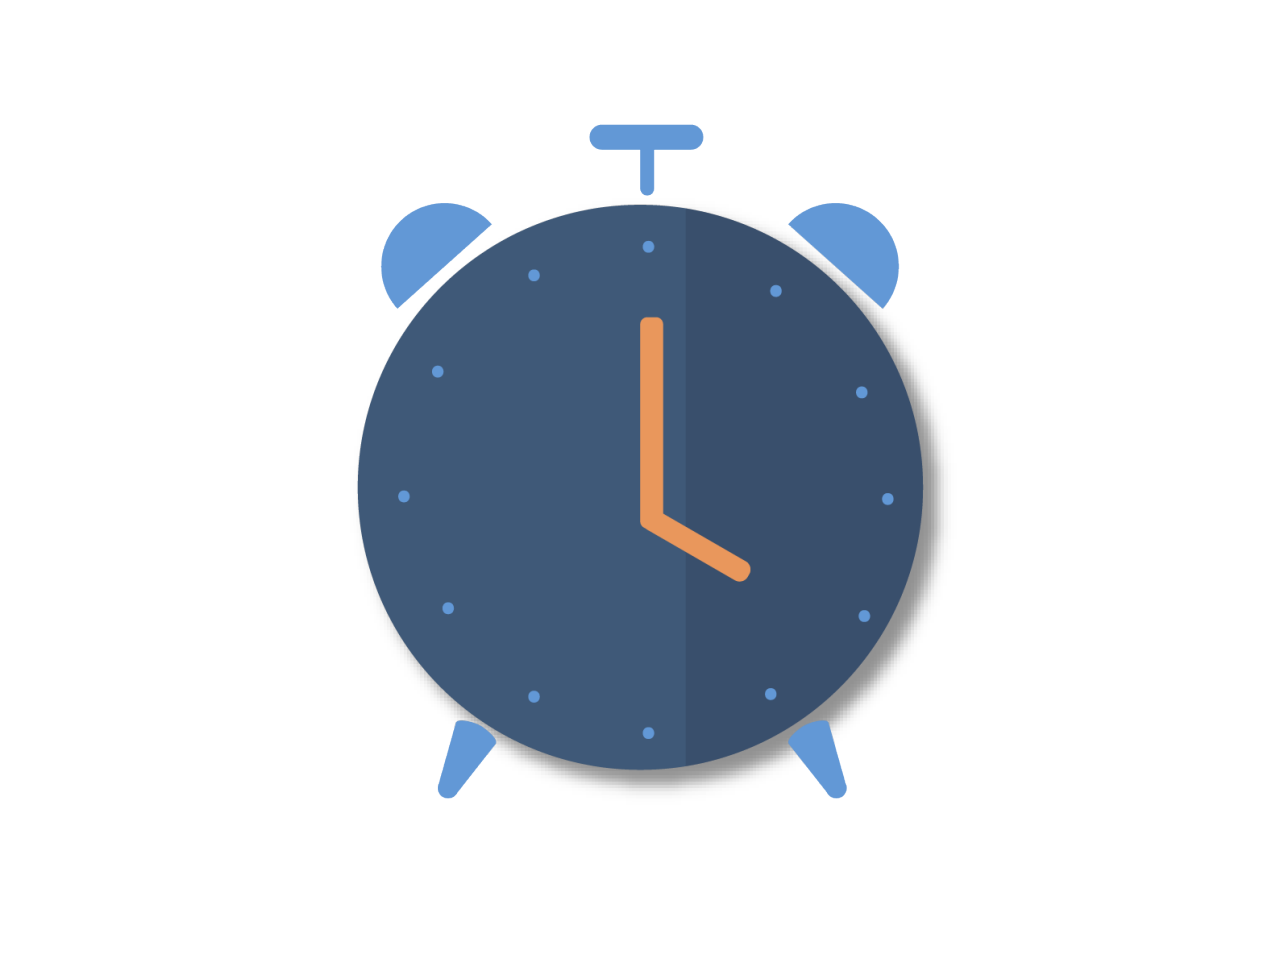 Image shows an alarm clock with a dark blue face, light blue bells and legs and small dots to represent the hours. The hands are orange and read 4 o'clock. The alarm clock represents time until retirement. 